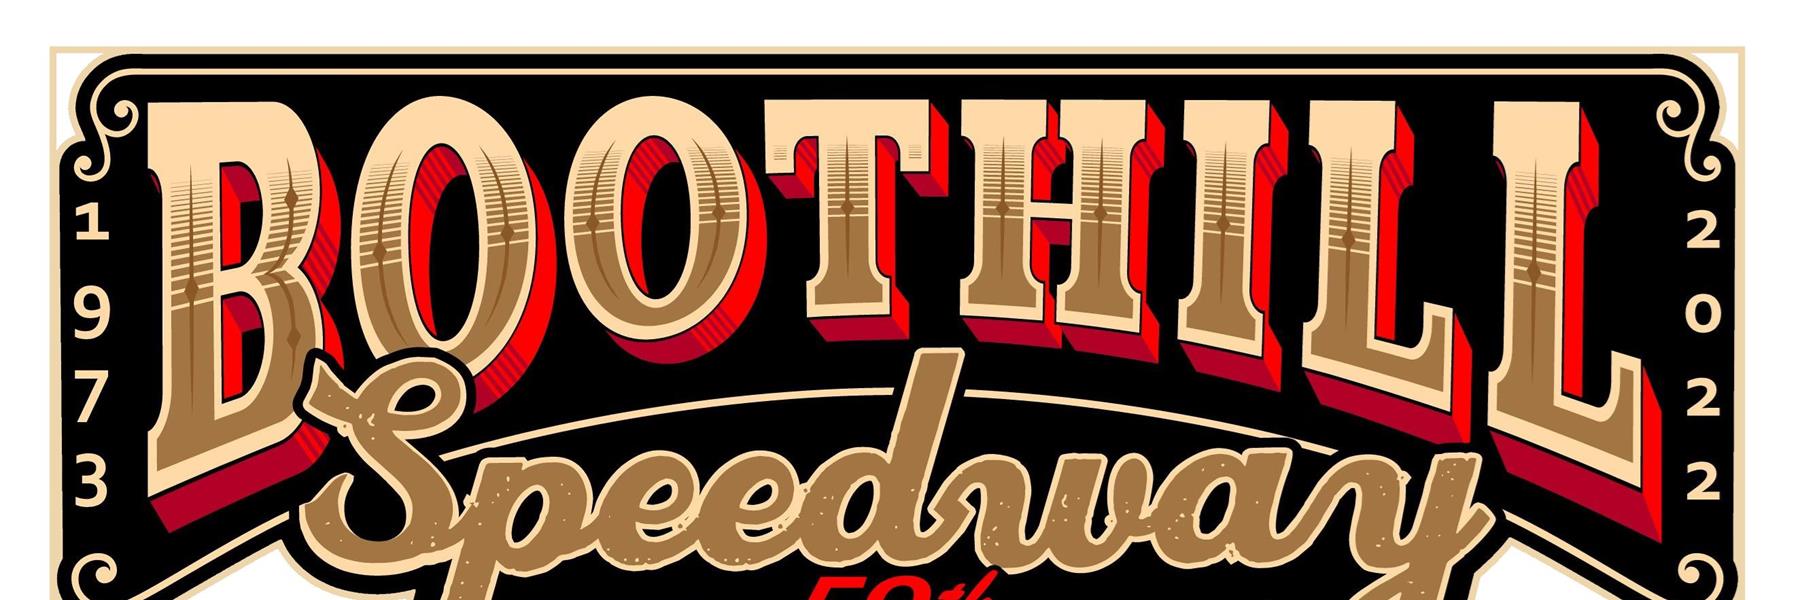 5/14/2022 - Boothill Speedway